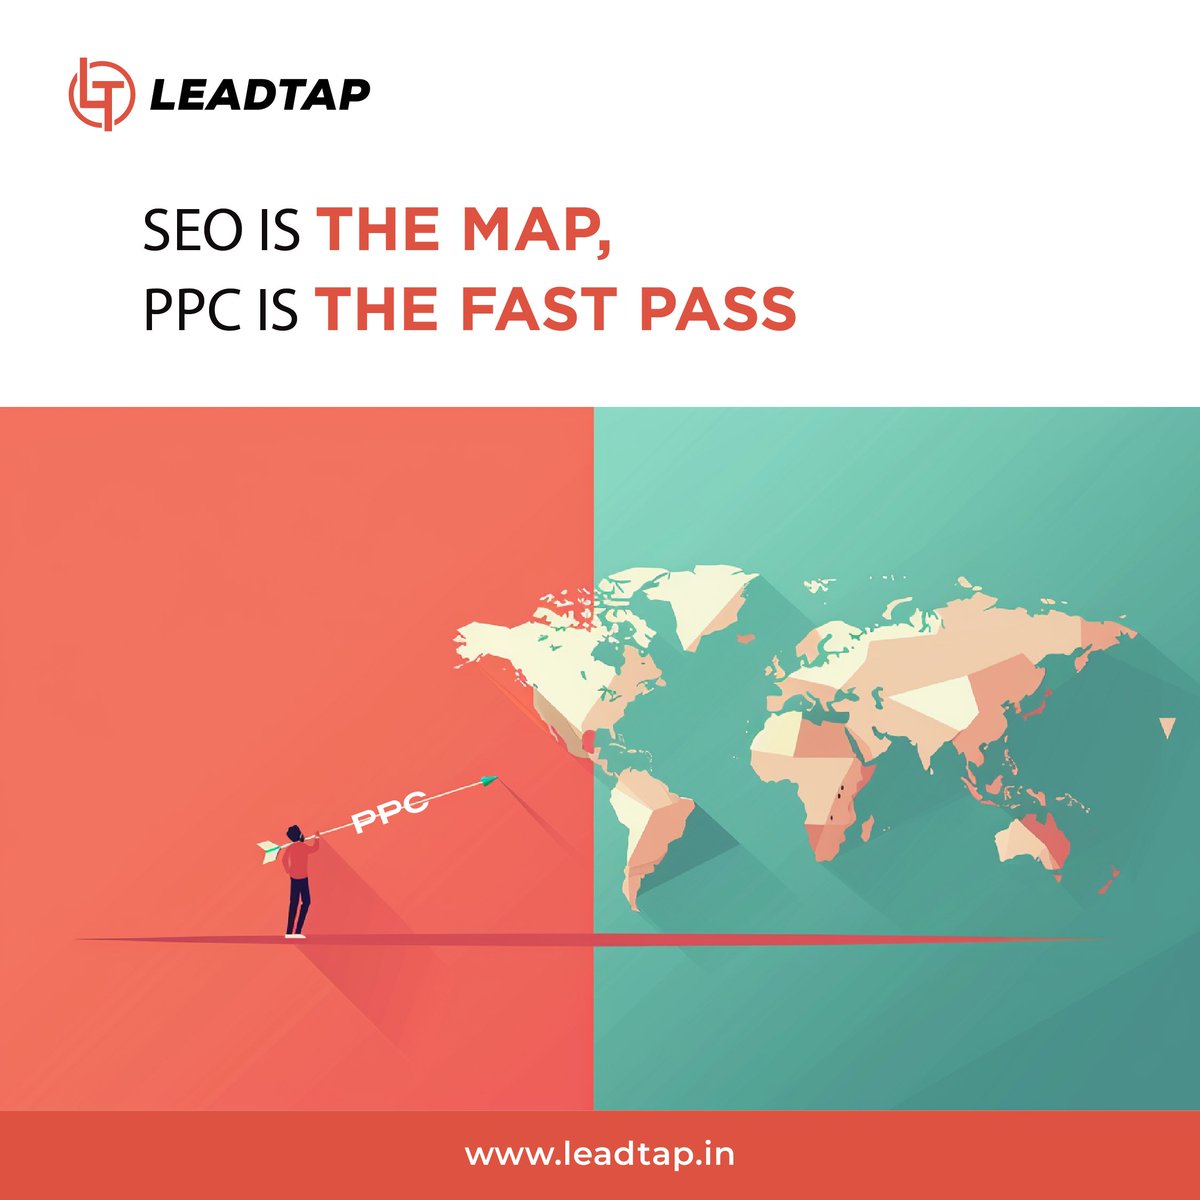 Tired of waiting for results? Combine SEO and PPC for a powerful
marketing strategy.

#seoexpert #seoagency #seo #digitalmarketing #digitalmarketingagencyonline
#digitalmarketingservices #marketingstrategy #digitalmarketingtips
#digitalmarketingstrategies #leadtap